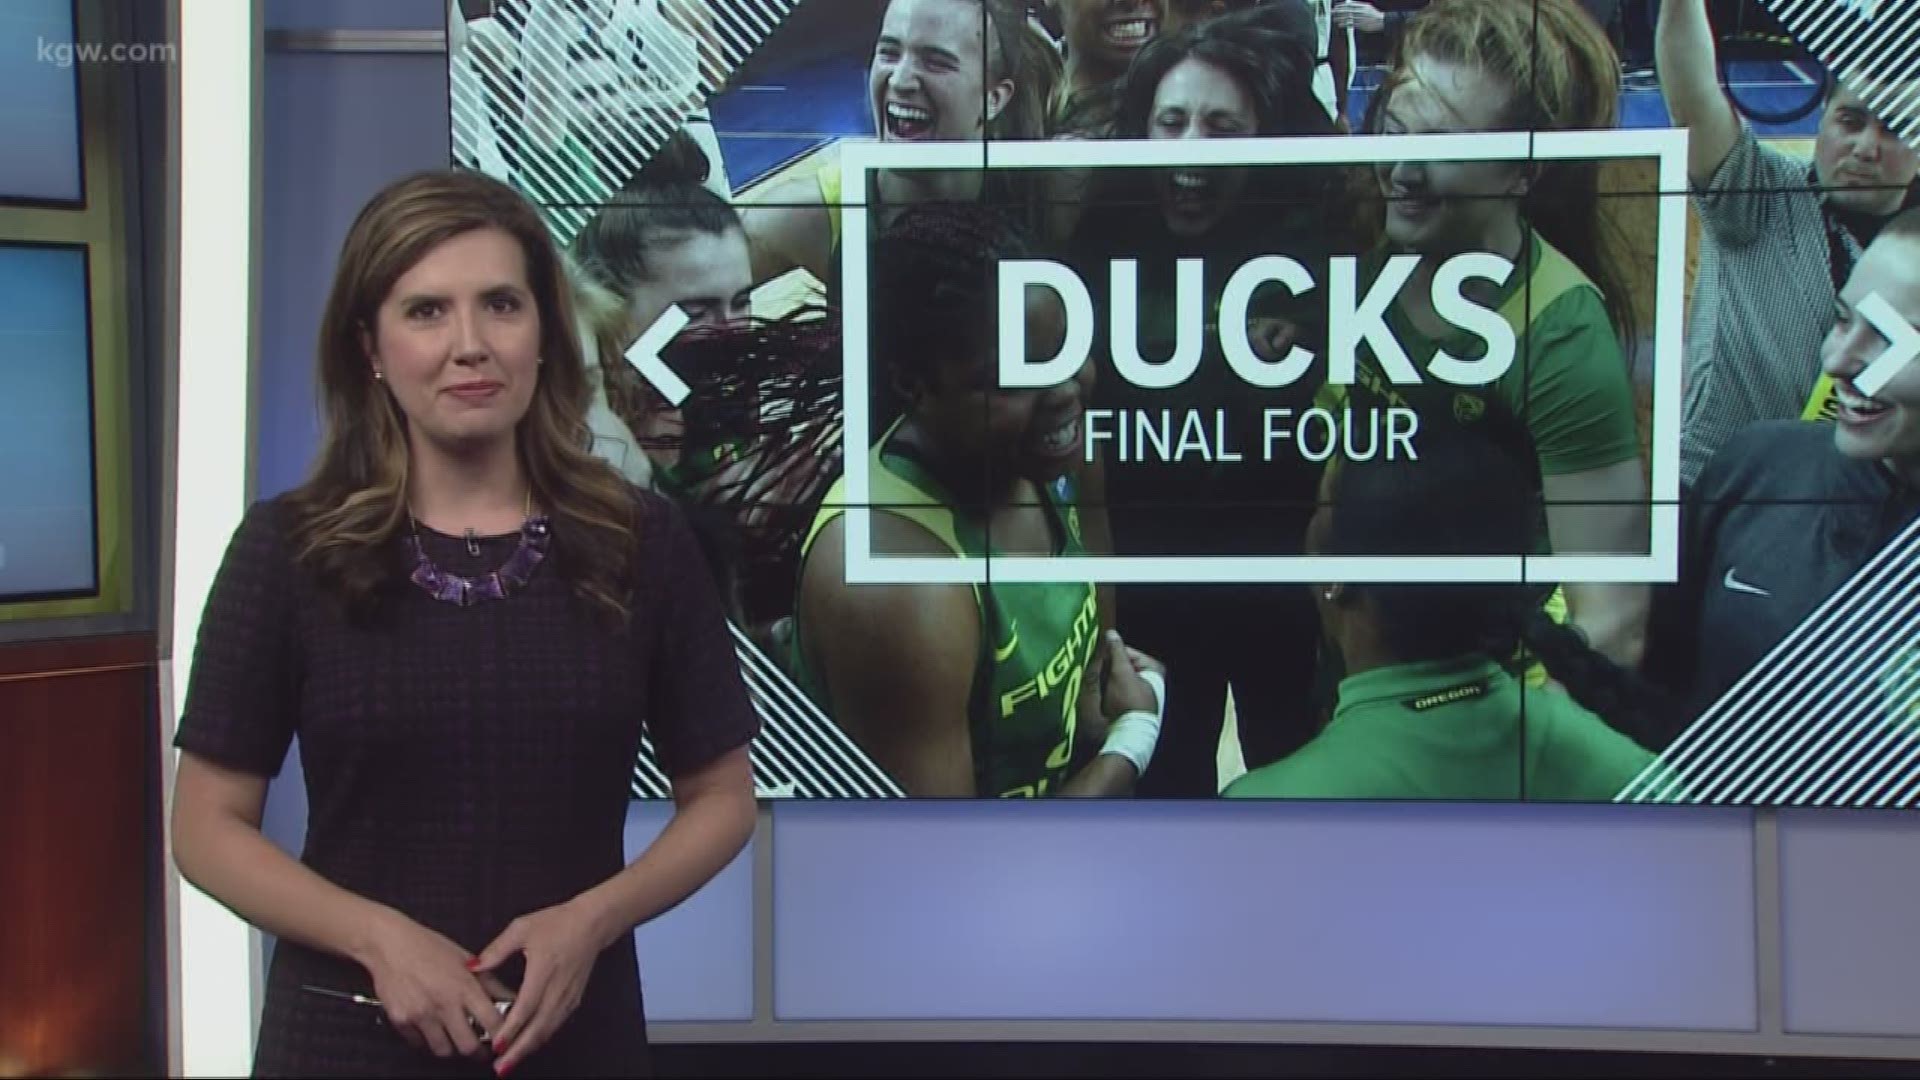 The independent student newspaper wanted to raise $1,500. They exceeded that goal and will now send three reporters to Tampa to cover the Ducks at the Final Four.